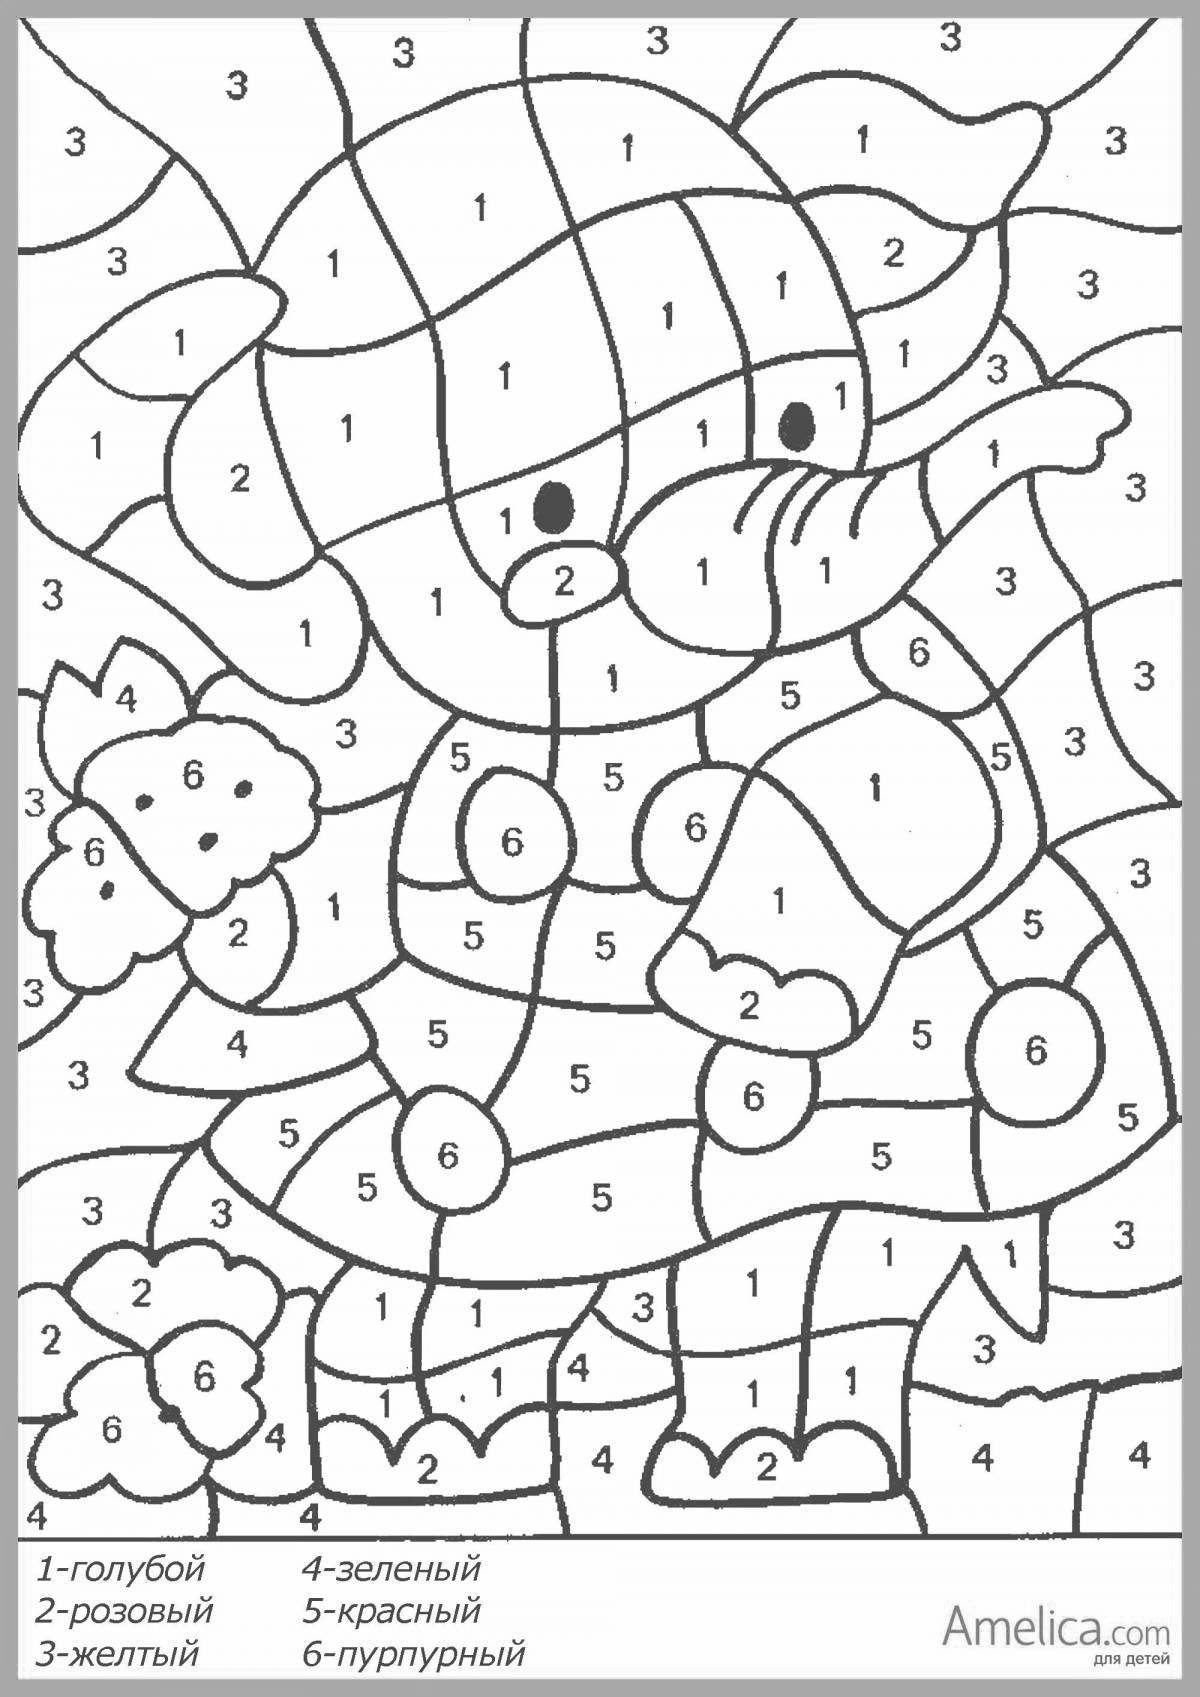 Complex coloring by numbers for children 5-7 years old